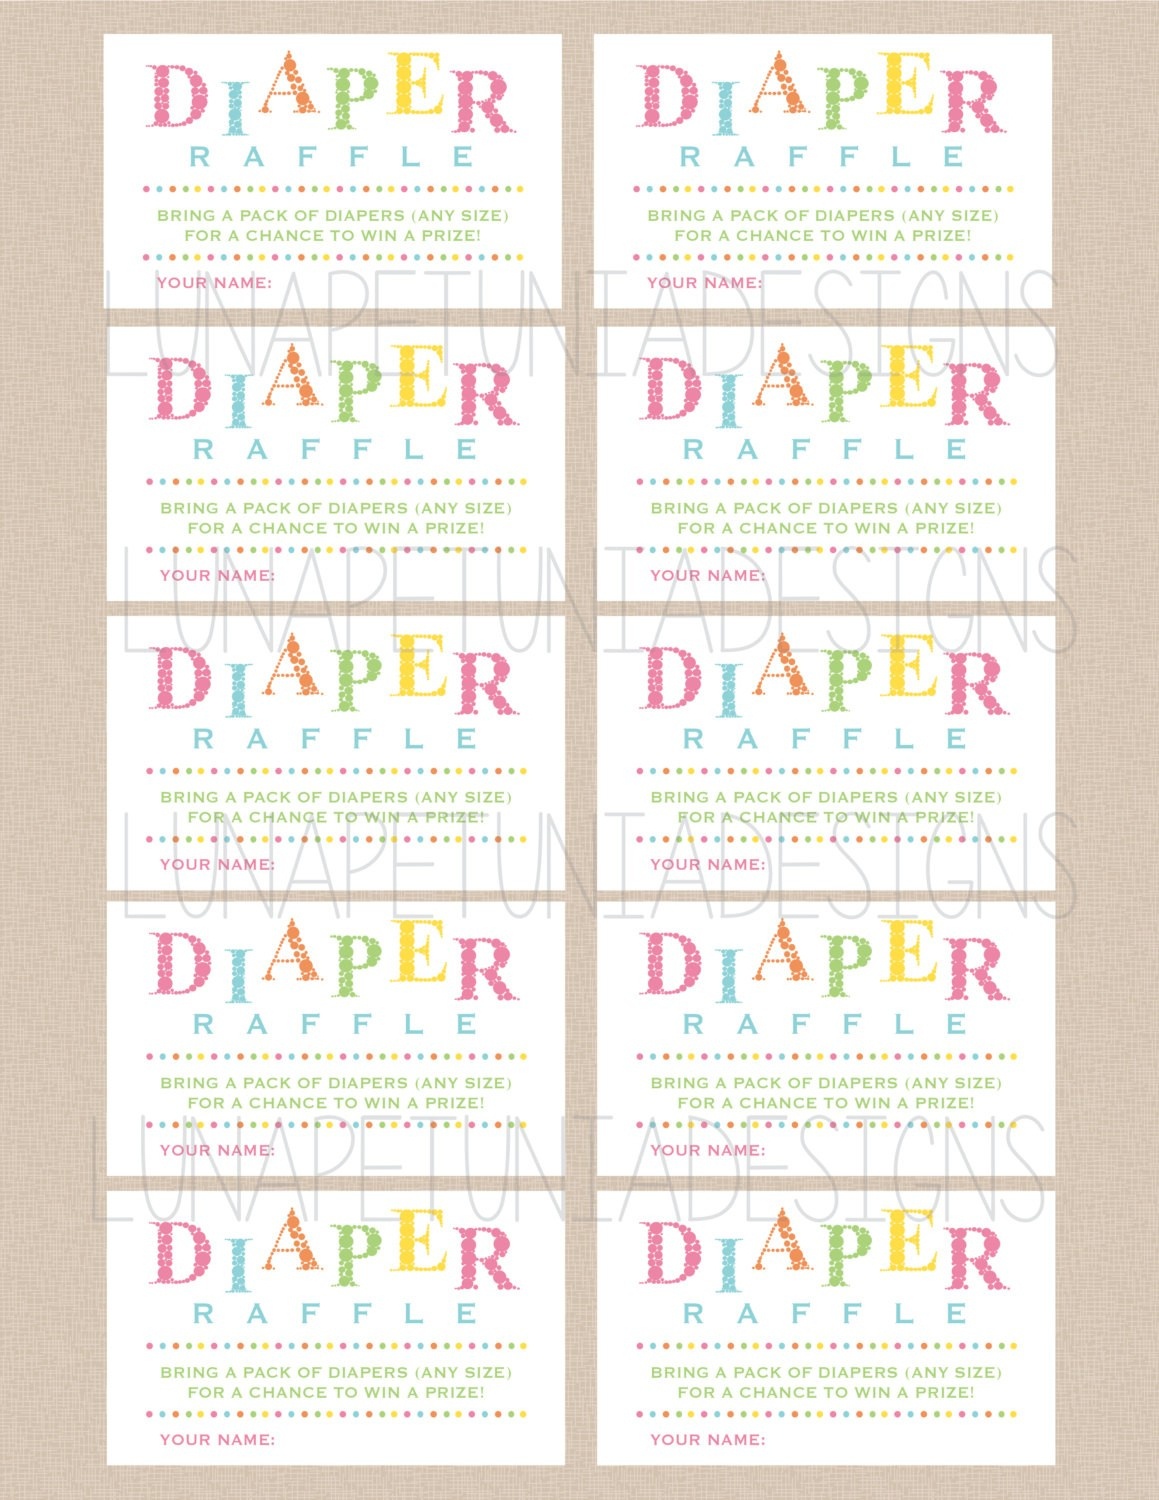 Review Free Printable Diaper Raffle Tickets For Baby Shower - Ideas - Free Printable Diaper Raffle Tickets